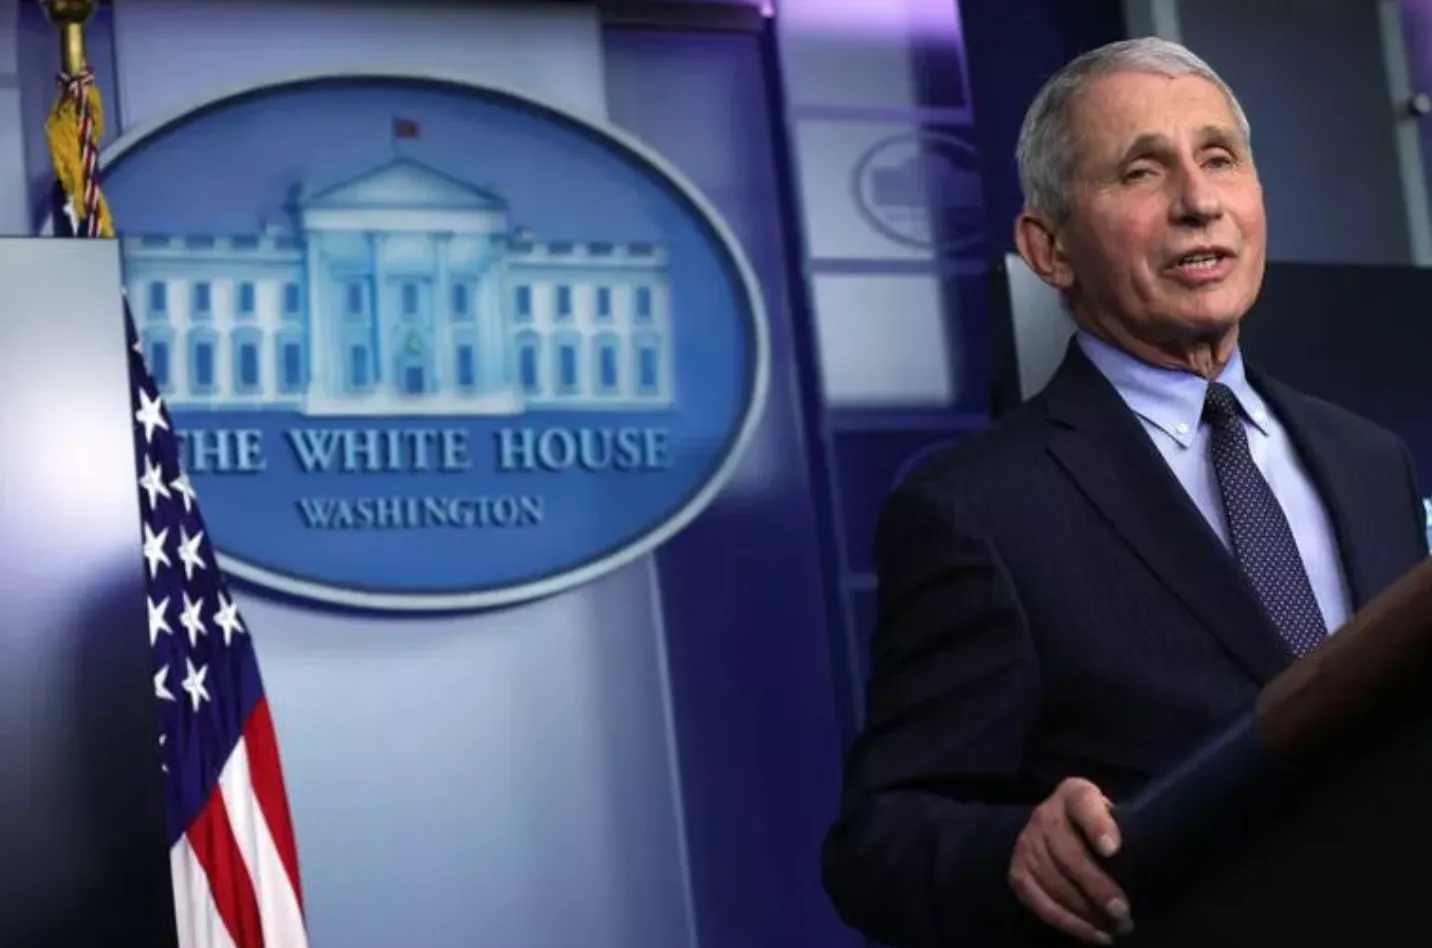 Dr. Anthony Fauci, director of the National Institute of Allergy and Infectious Diseases, speaks during a White House press briefing, conducted by White House Press Secretary Jen Psaki, at the White House Jan. 21.?w=200&h=150